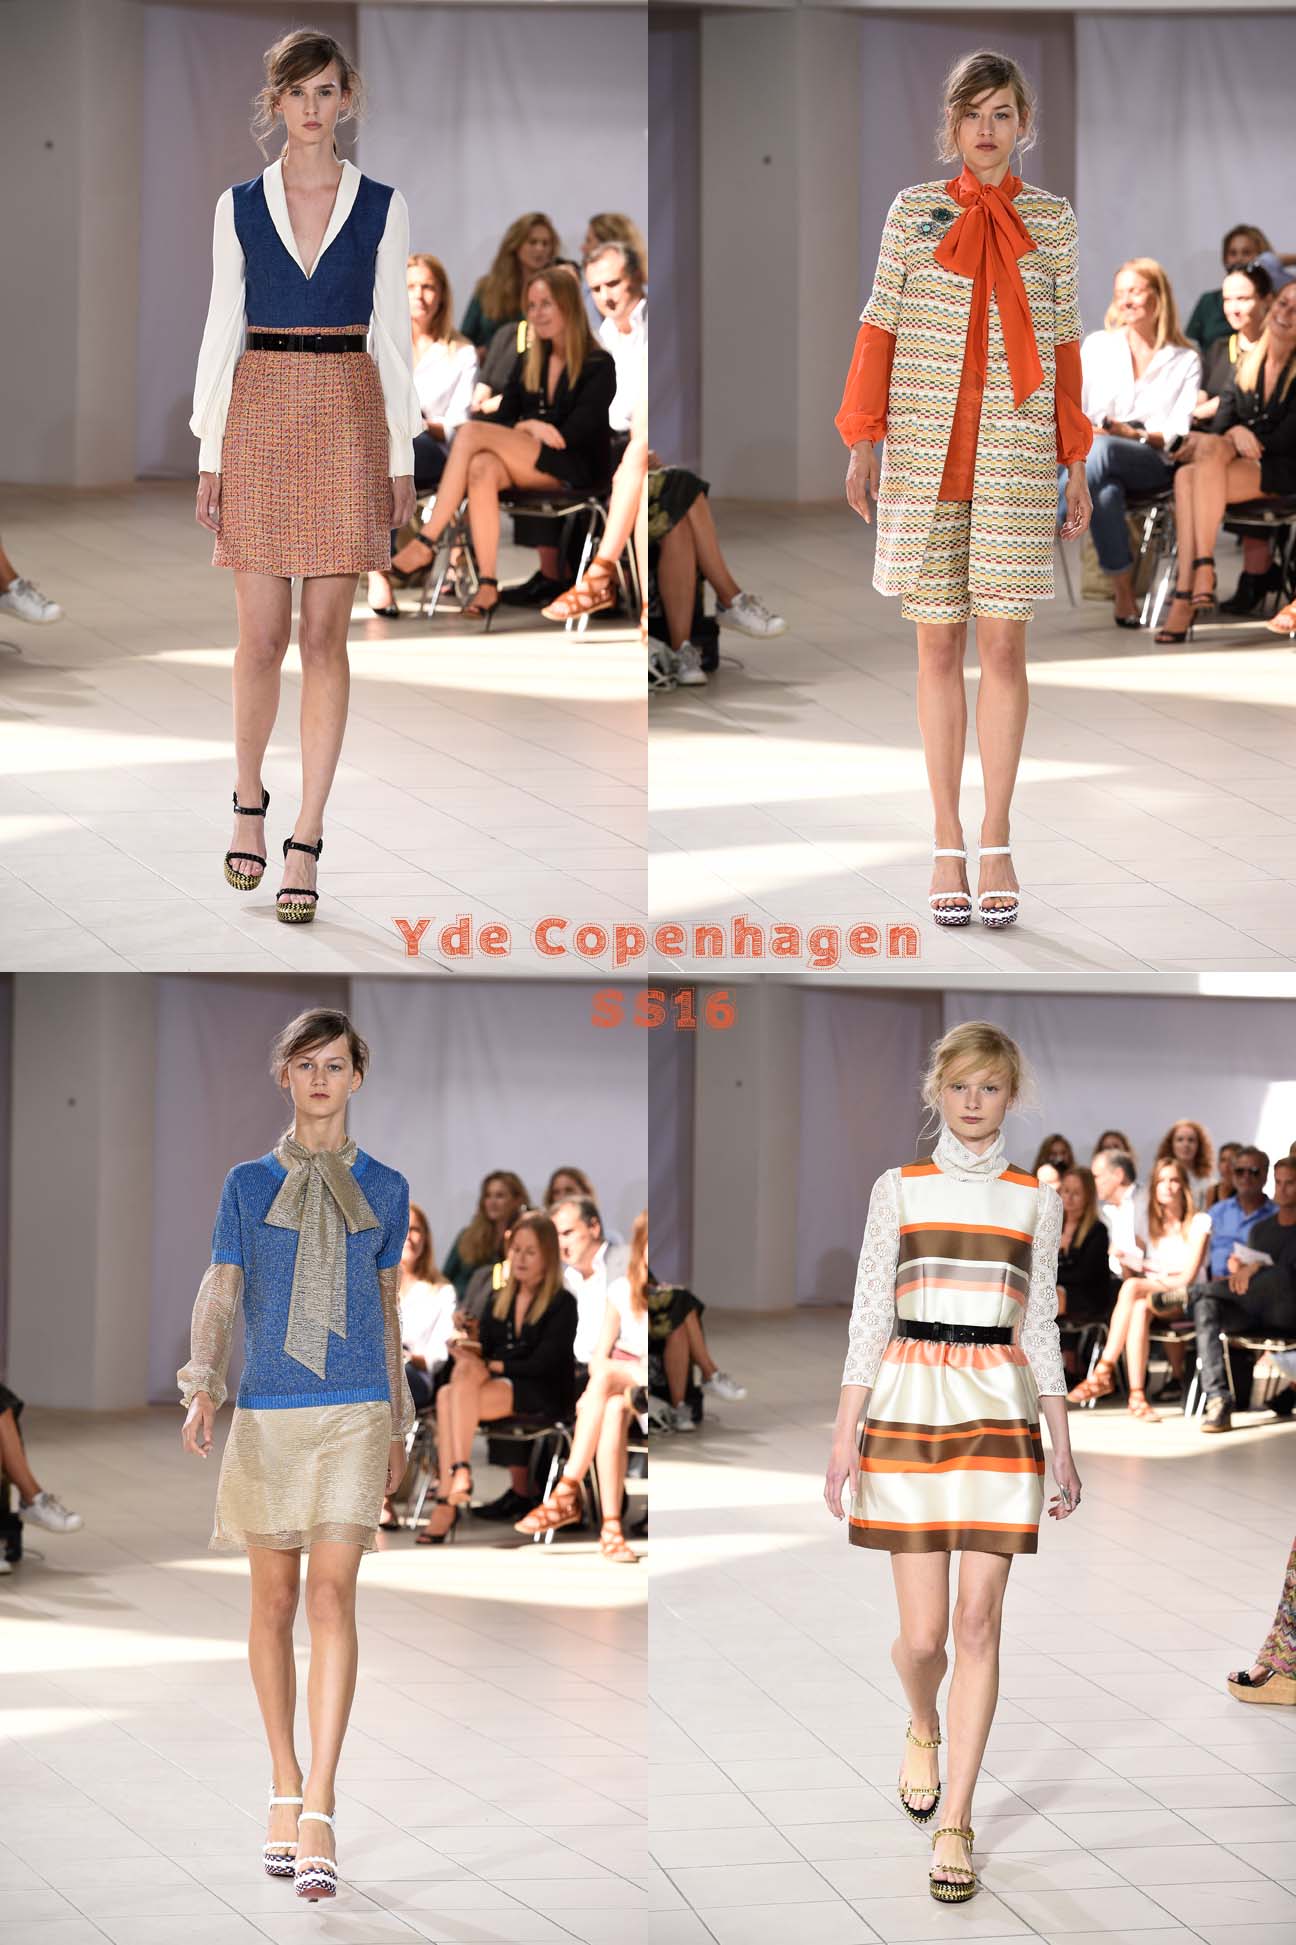 The Danish designer Ole Yde showed his SS16 Collection at the interior shop Paustion during the Copenhagen fashion Week.